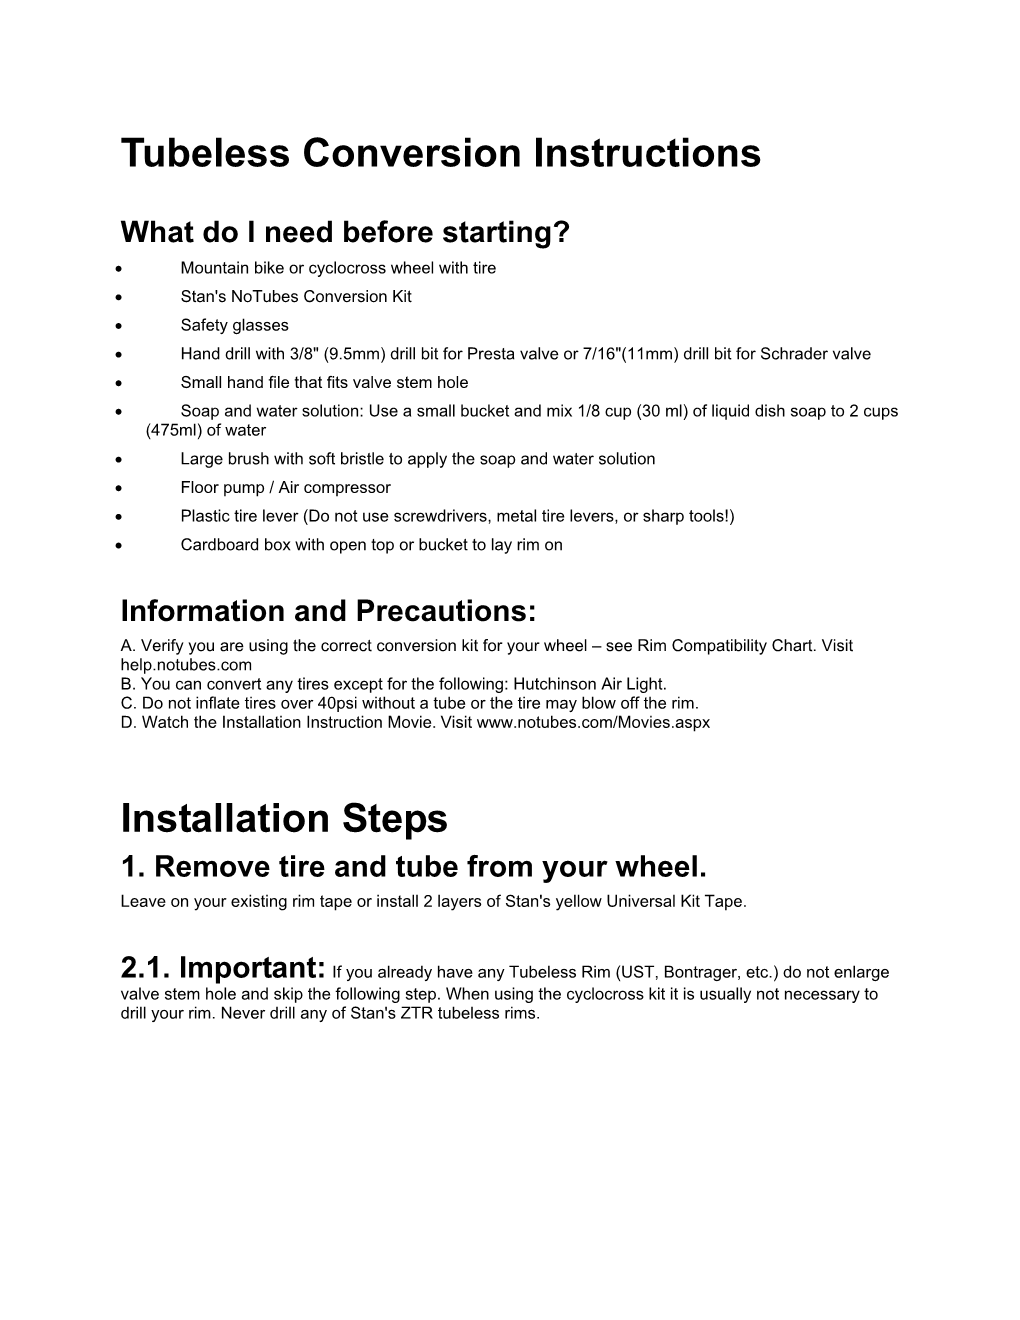 Stan's Tubeless Conversion Instructions